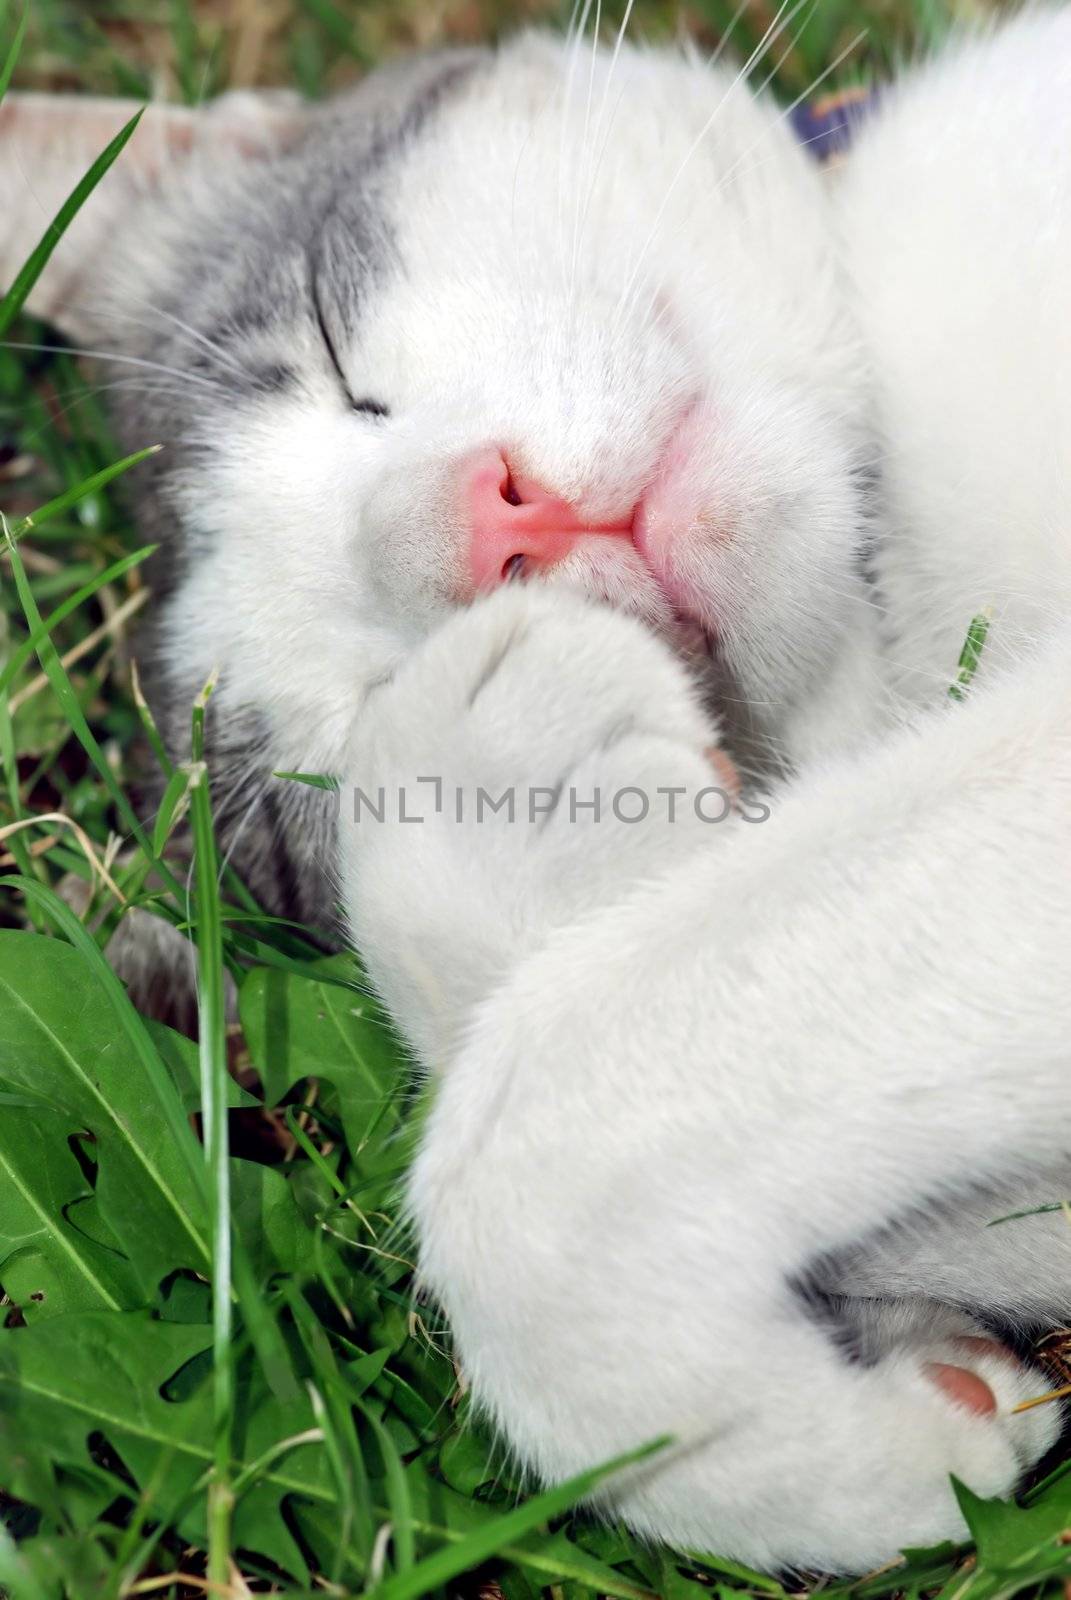 white cat with pink nose sleeping in grass portrait